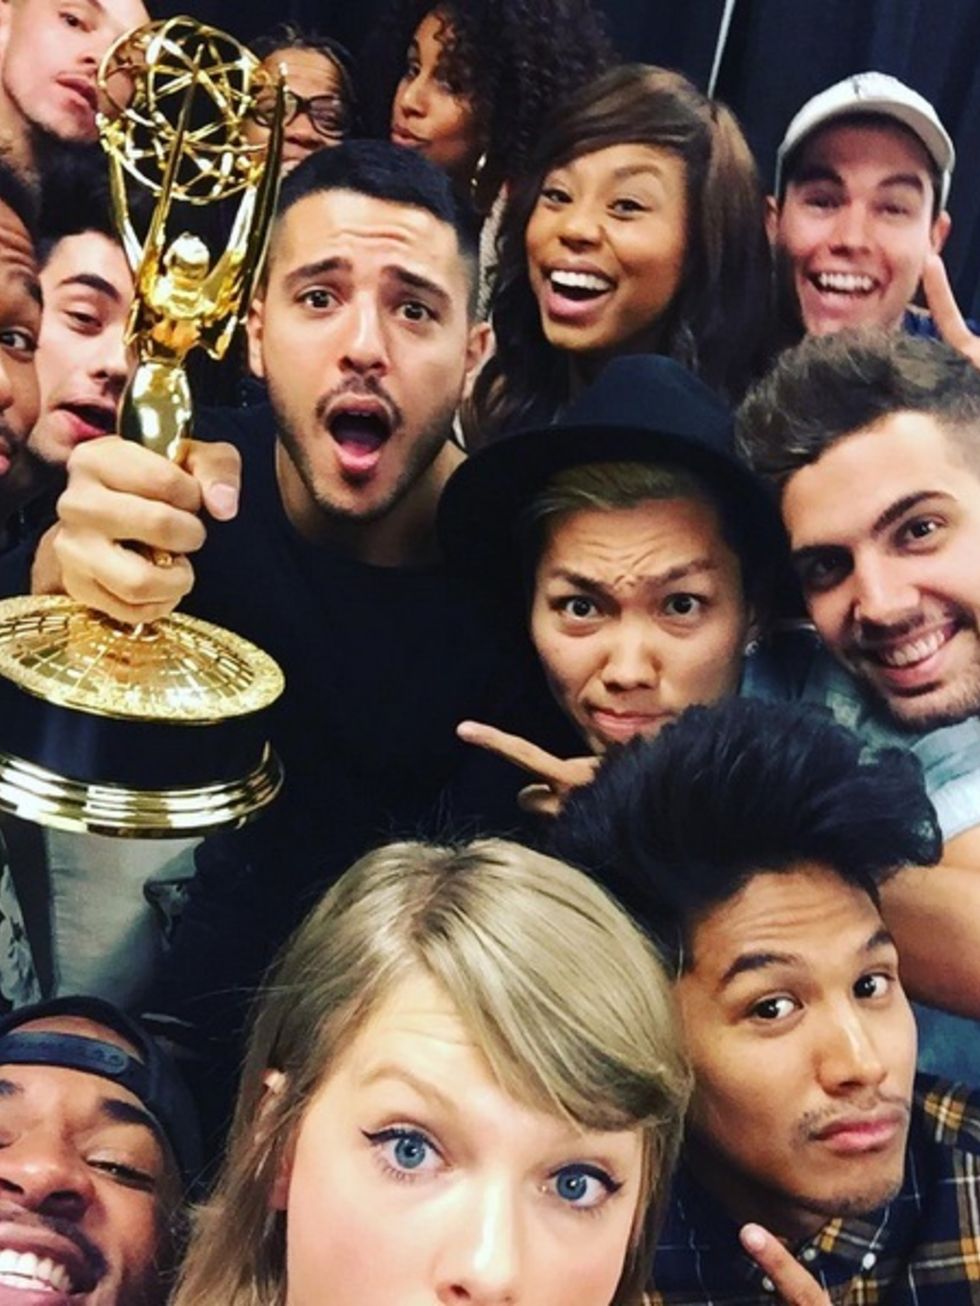 <p>2015 has been Taylor's year, undoubtedly. Here she is enjoying her Emmy win with her squad: 'If you need us, well be taking selfies with the Emmy ALL DAY' she wrote. Is #EmmySelfie the new #Ocscar Selfie?</p>